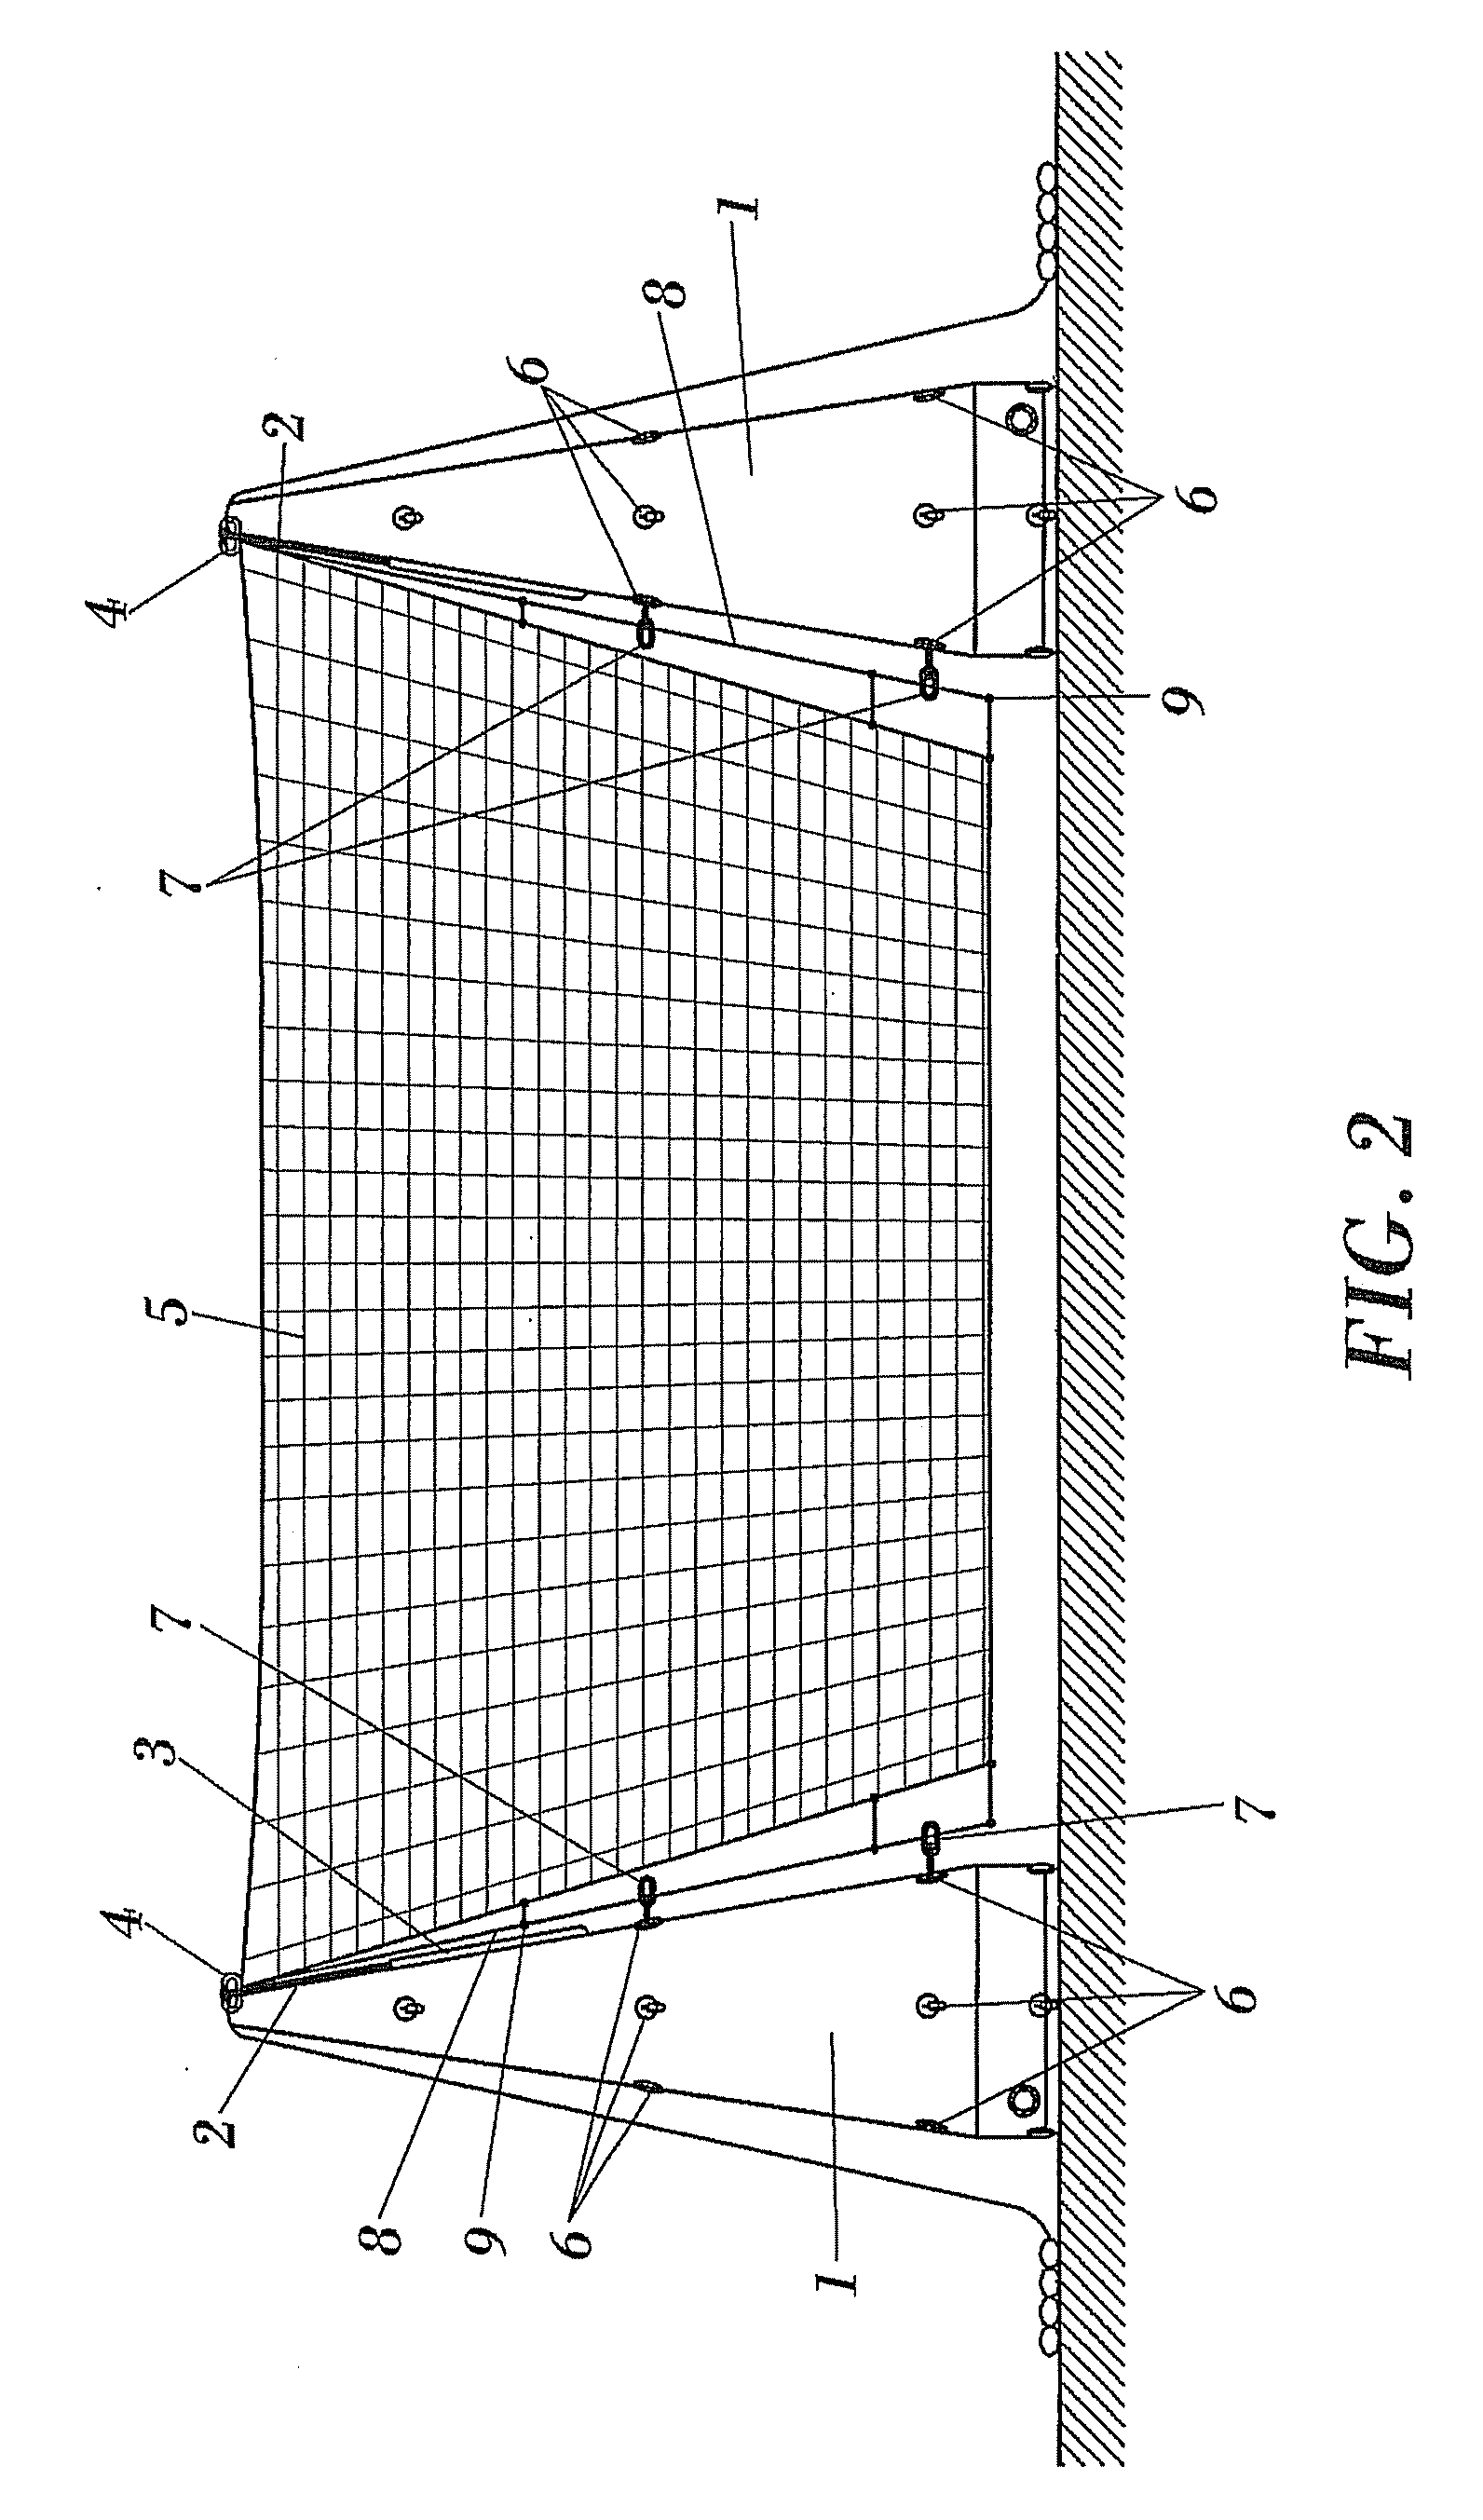 Device and method for recovering unmanned airborne vehicles